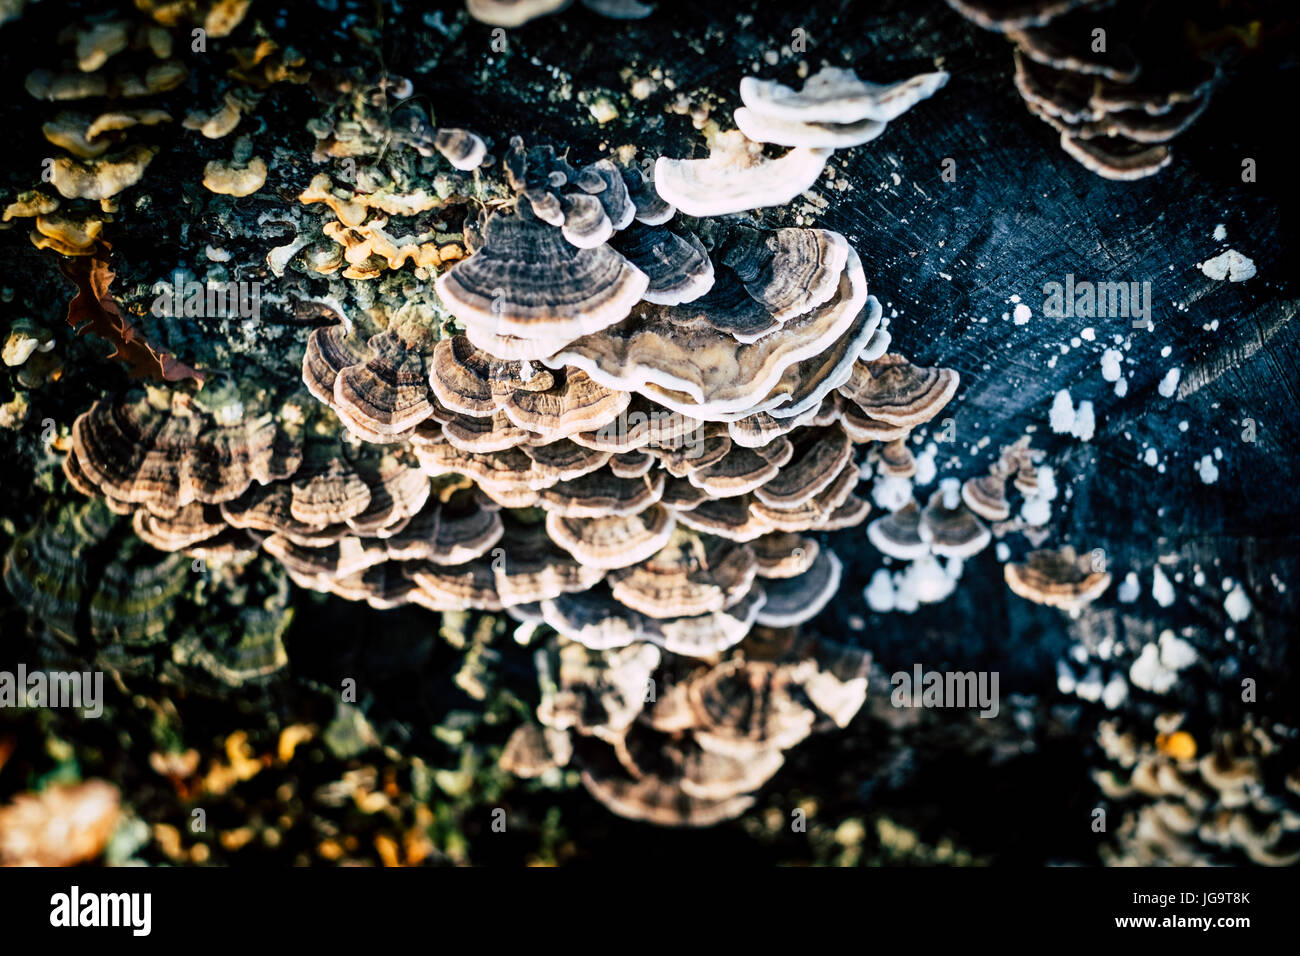 mushrooms families on old sawed wood trunk Stock Photo